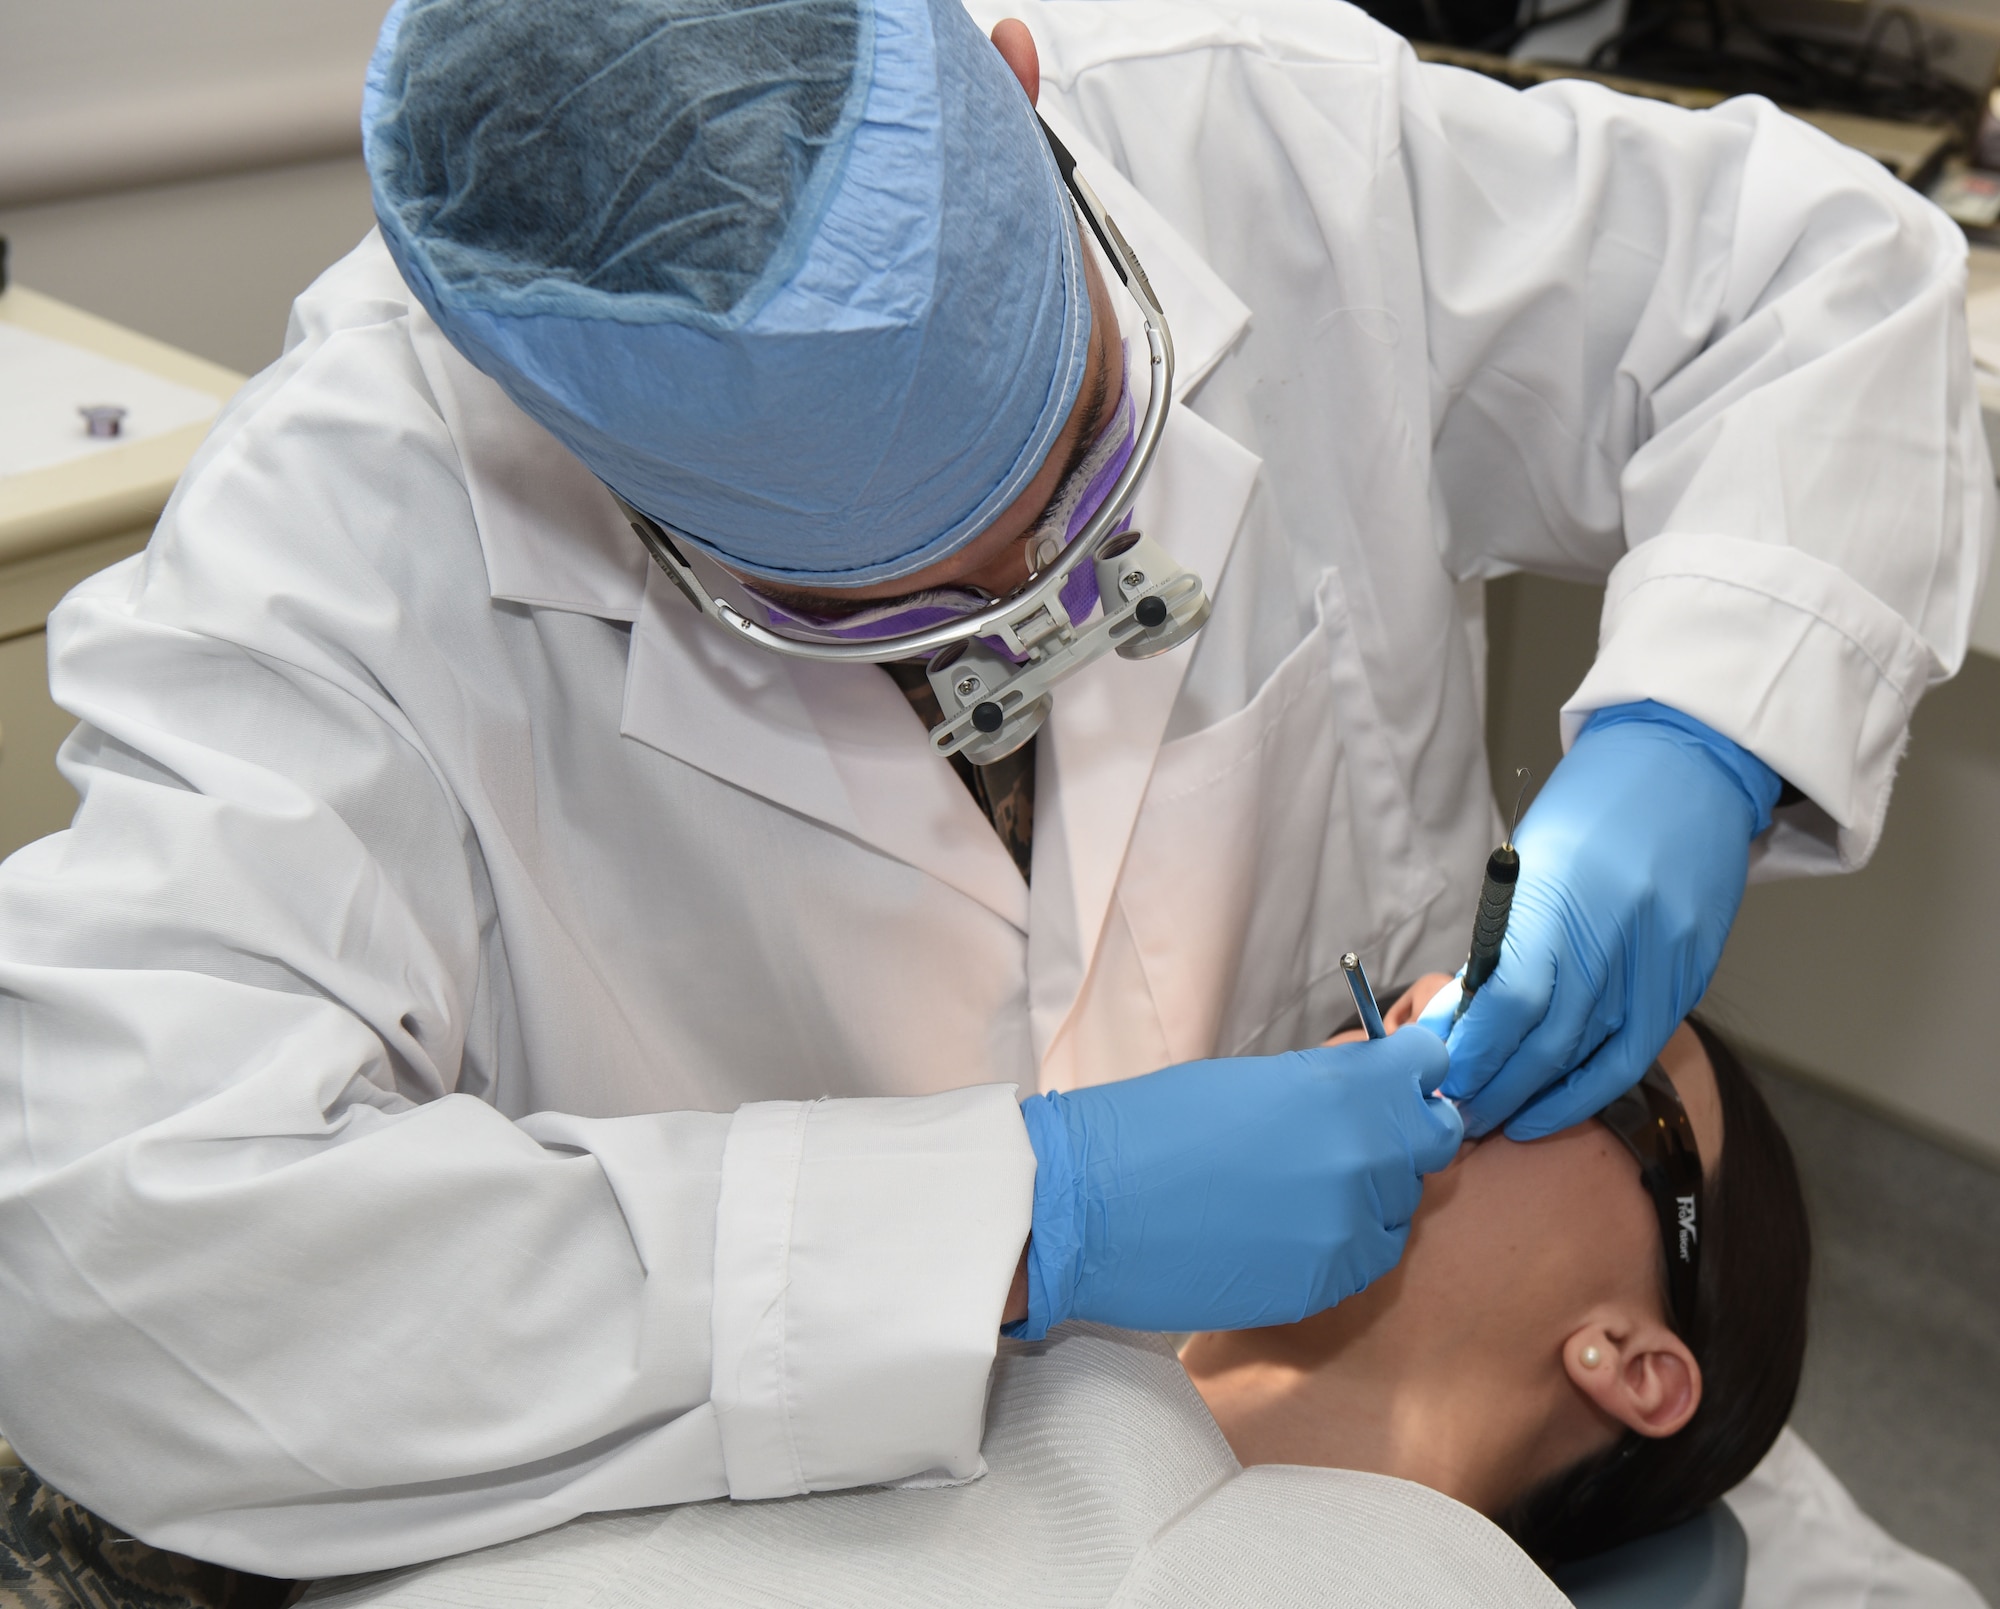 Staff Sgt. Richard Rodriguez, 90th Medical Operations Squadron dental support NCO in charge, checks a patient’s teeth at F.E. Warren Air Force Base, Wyo., April 6, 2017. The dental clinic is focused on achieving superior oral health and mission readiness through safe, effective and patient-centered care. (U.S. Air Force photo by Airman 1st Class Breanna Carter)